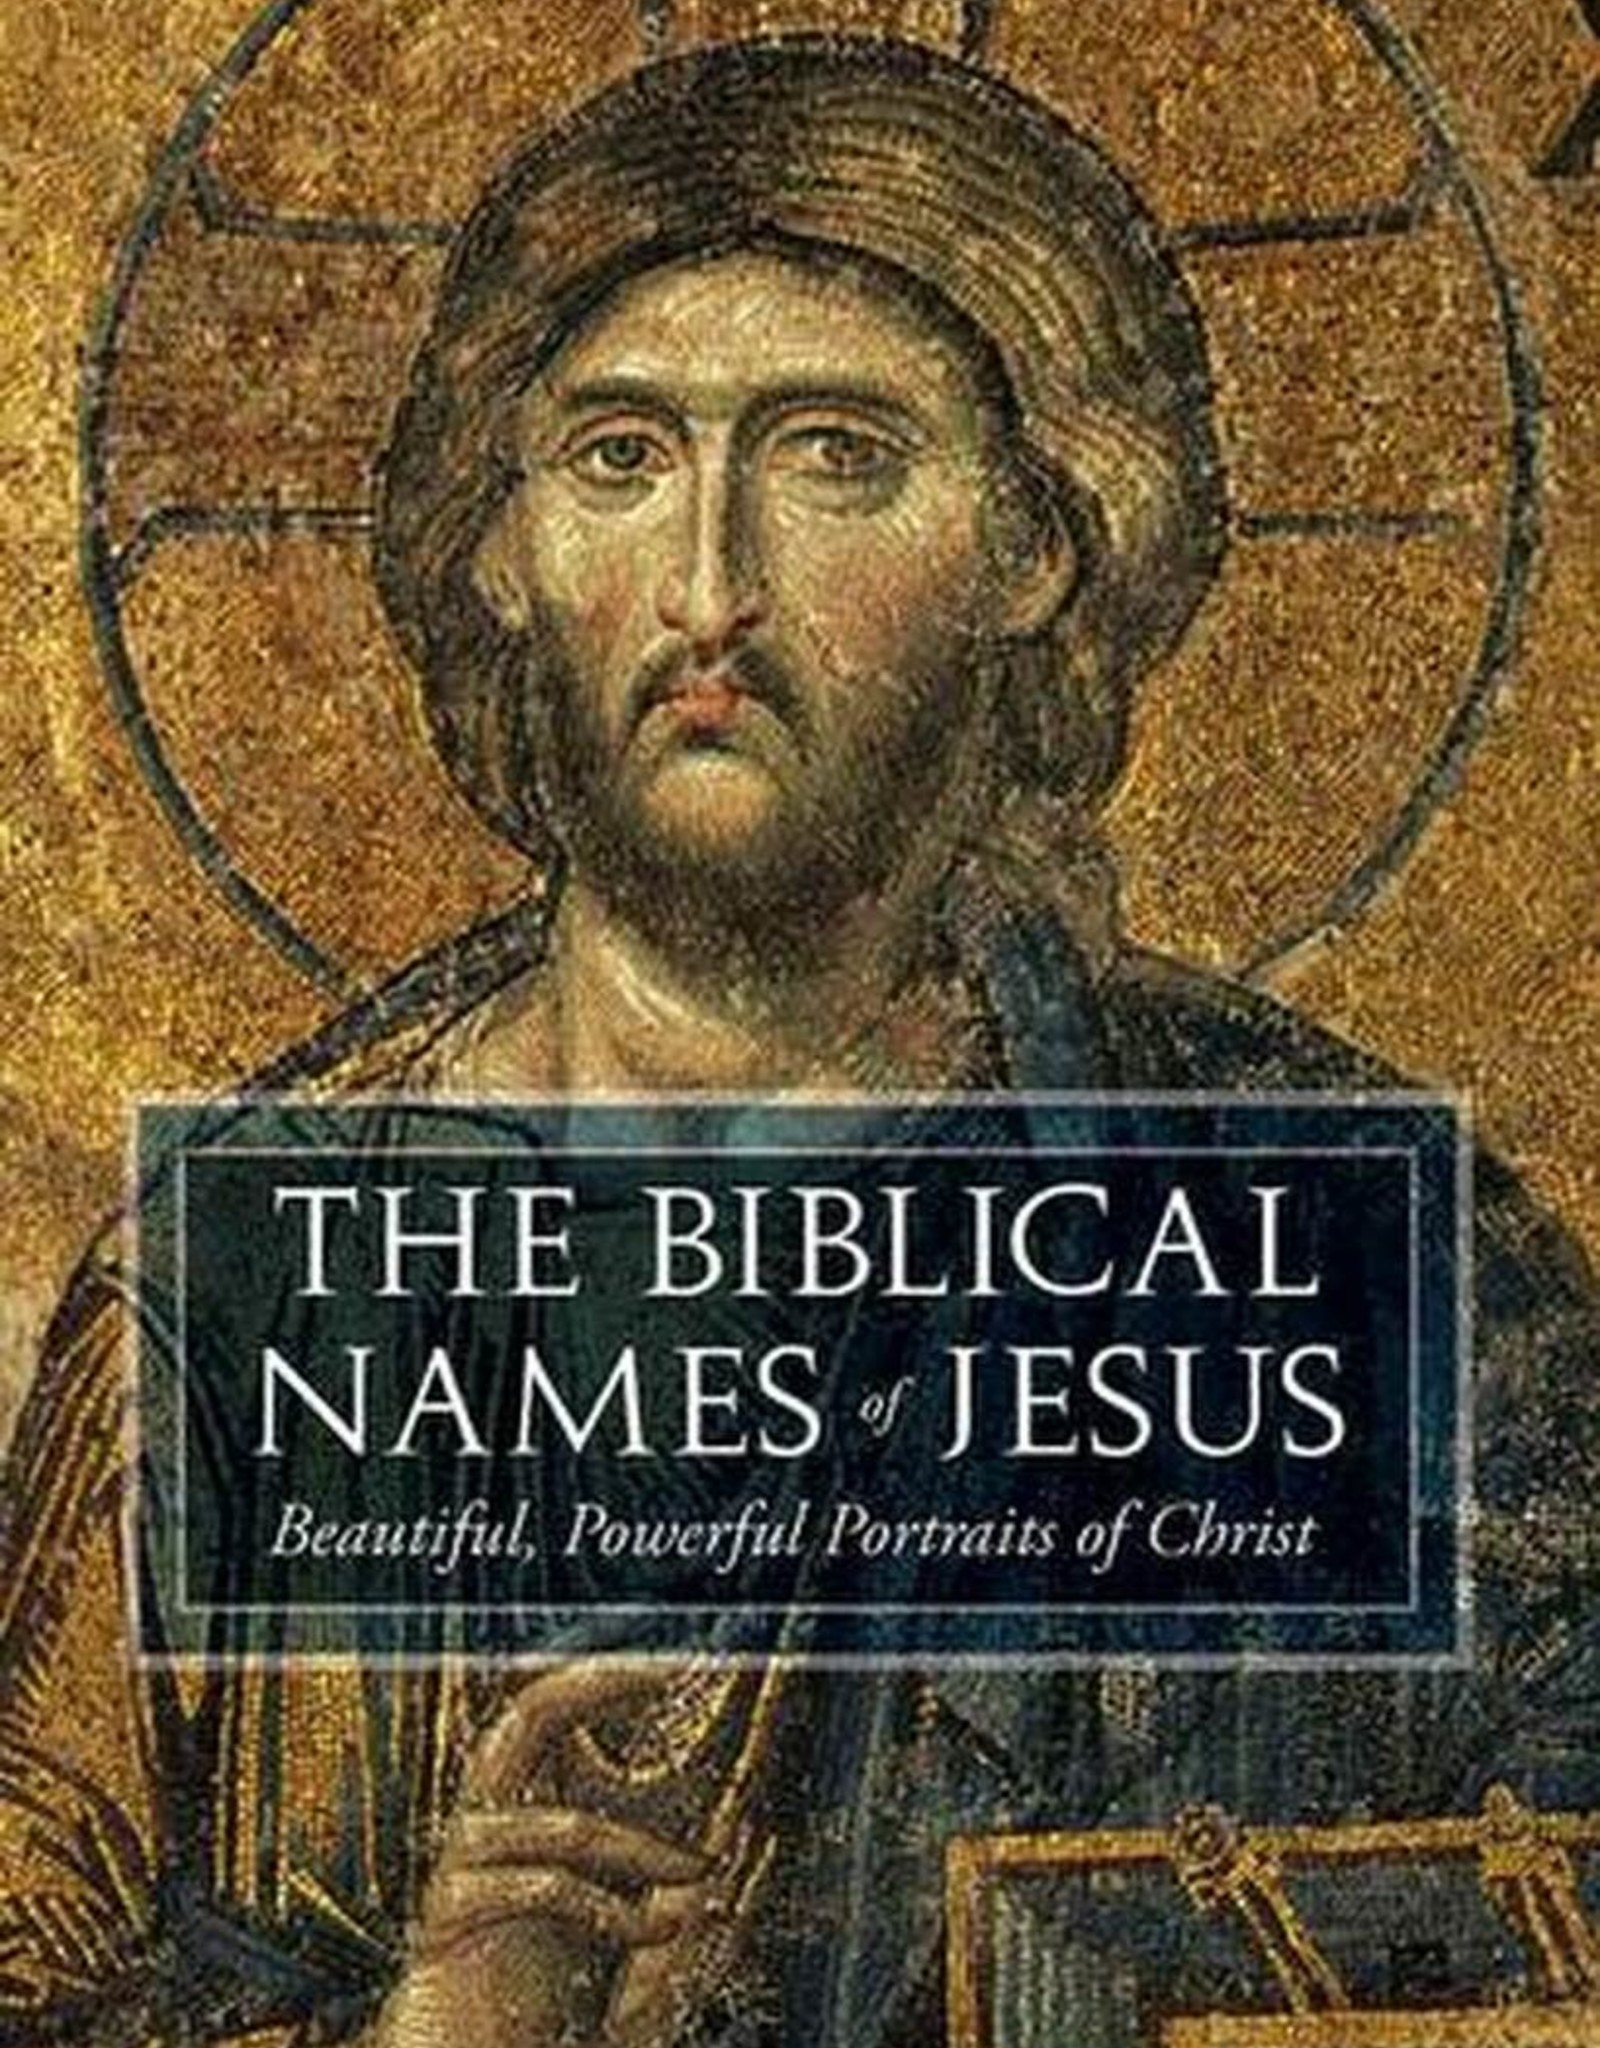 The Biblical Names of Jesus: Beautiful, Powerful Portraits of Christ